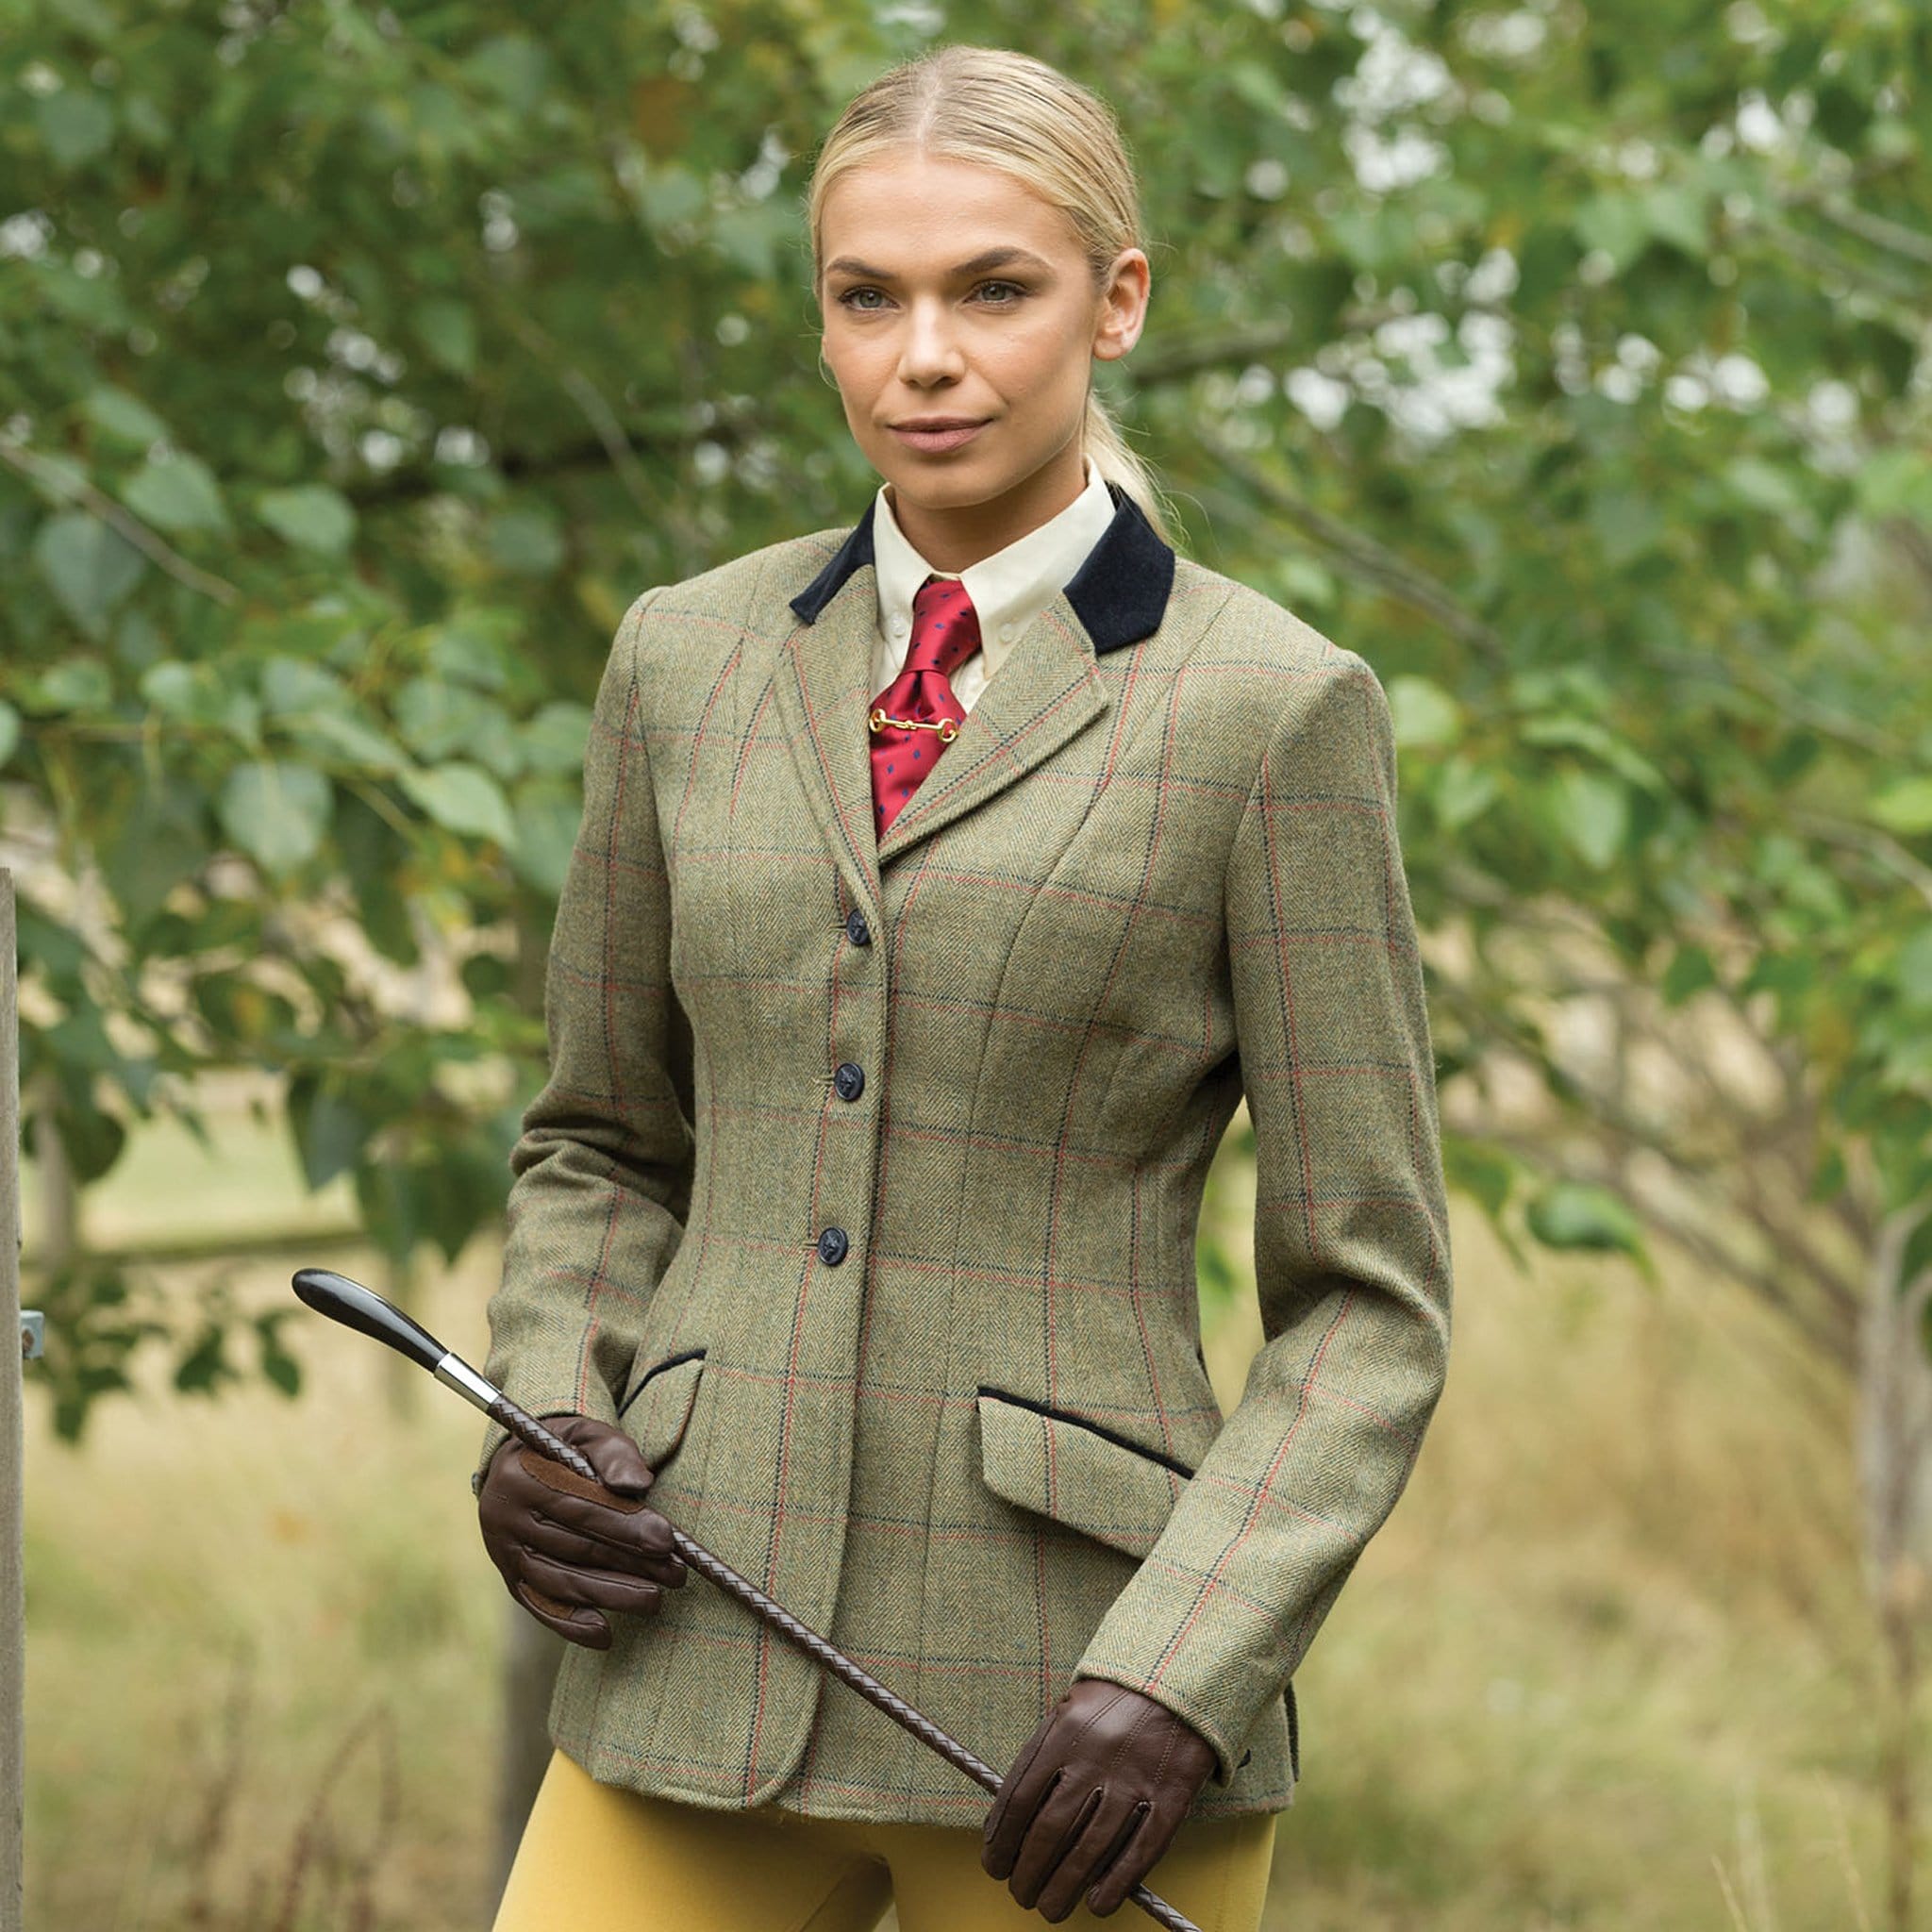 Women's Competition Jackets and Waistcoats – Tagged 